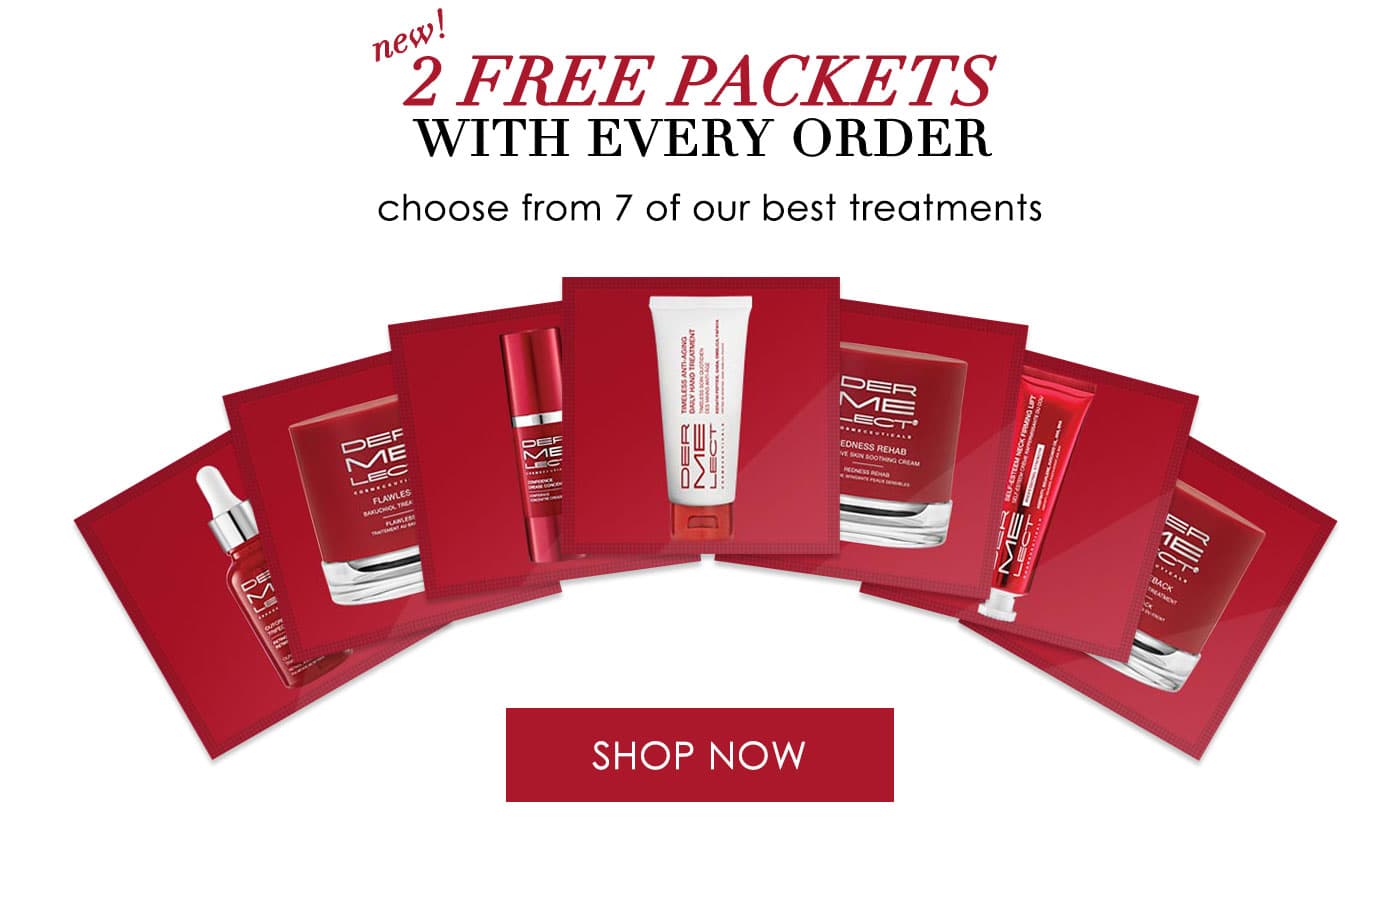 Free Packets